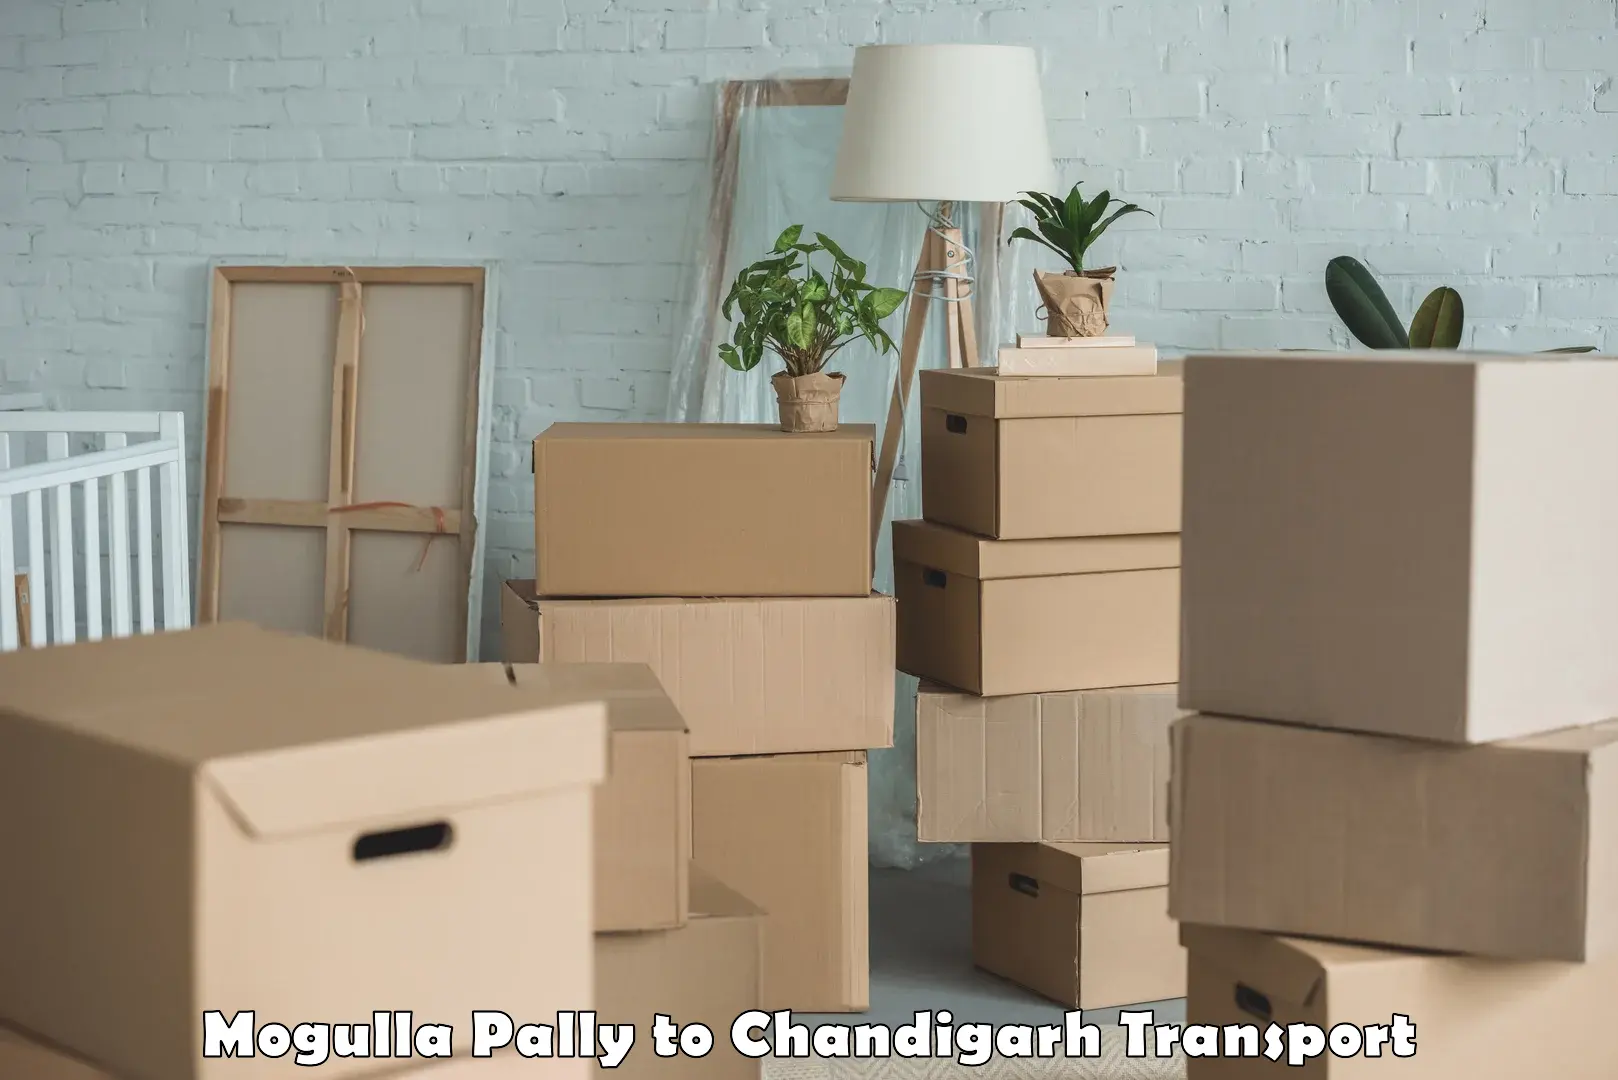 Daily parcel service transport in Mogulla Pally to Chandigarh